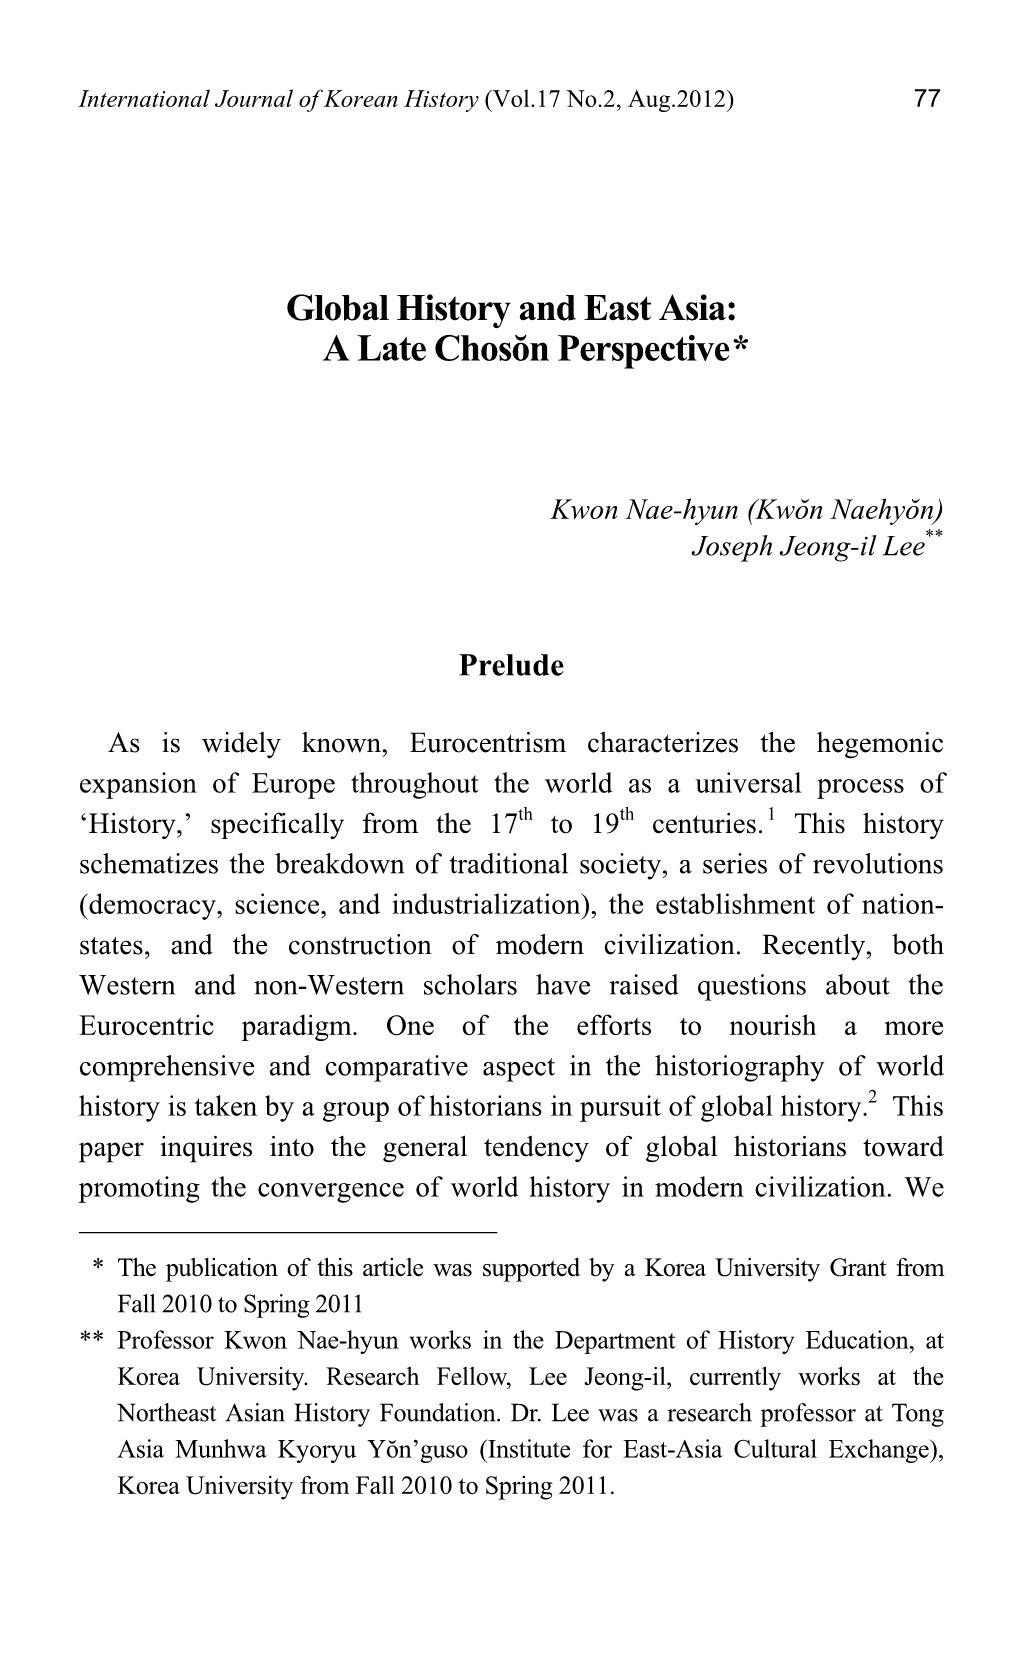 Global History and East Asia: a Late Chosŏn Perspective*